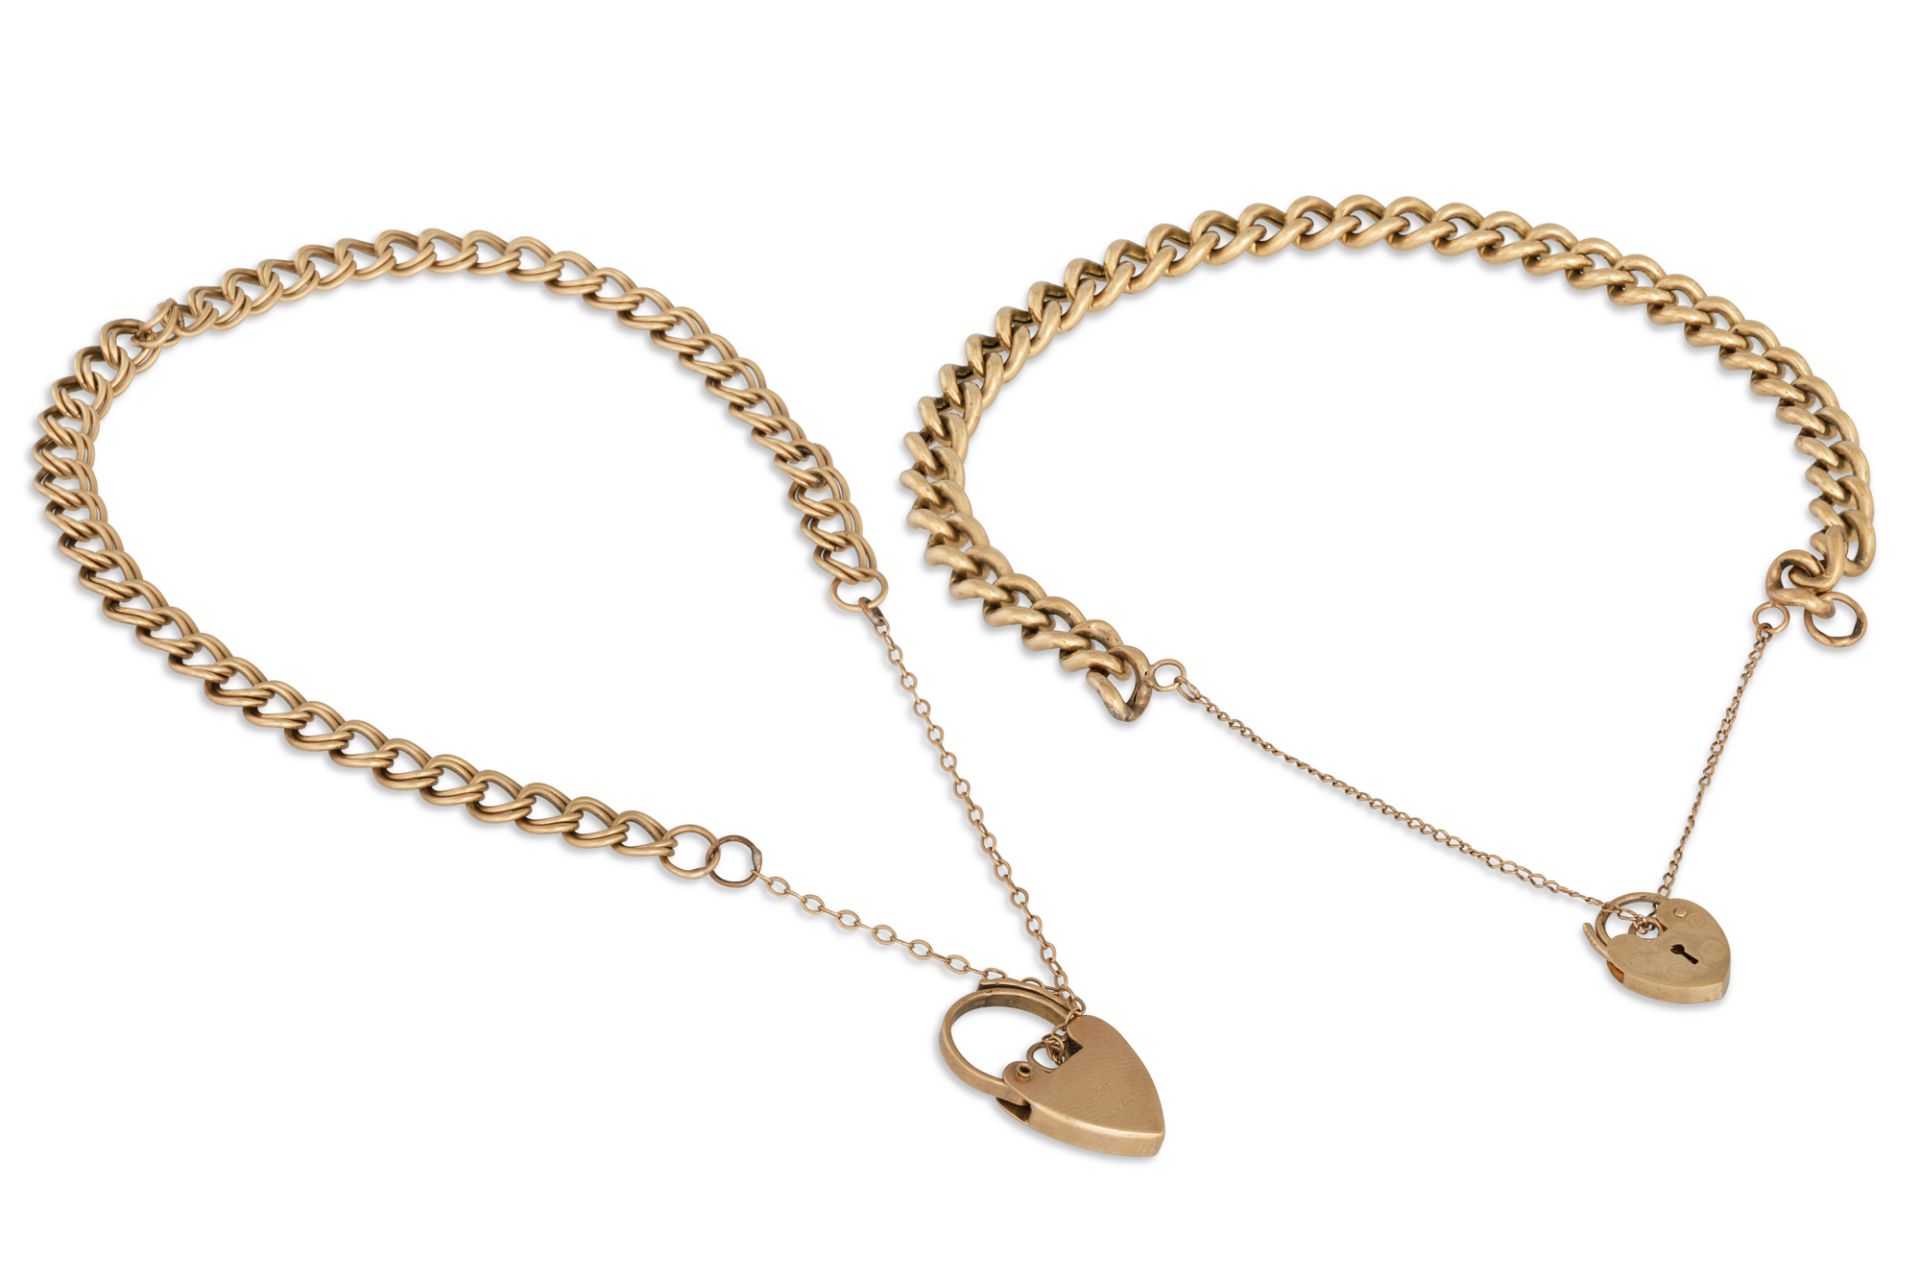 TWO 9CT GOLD CURB LINK BRACELETS, each with a padlock clasp, 15.8 g.